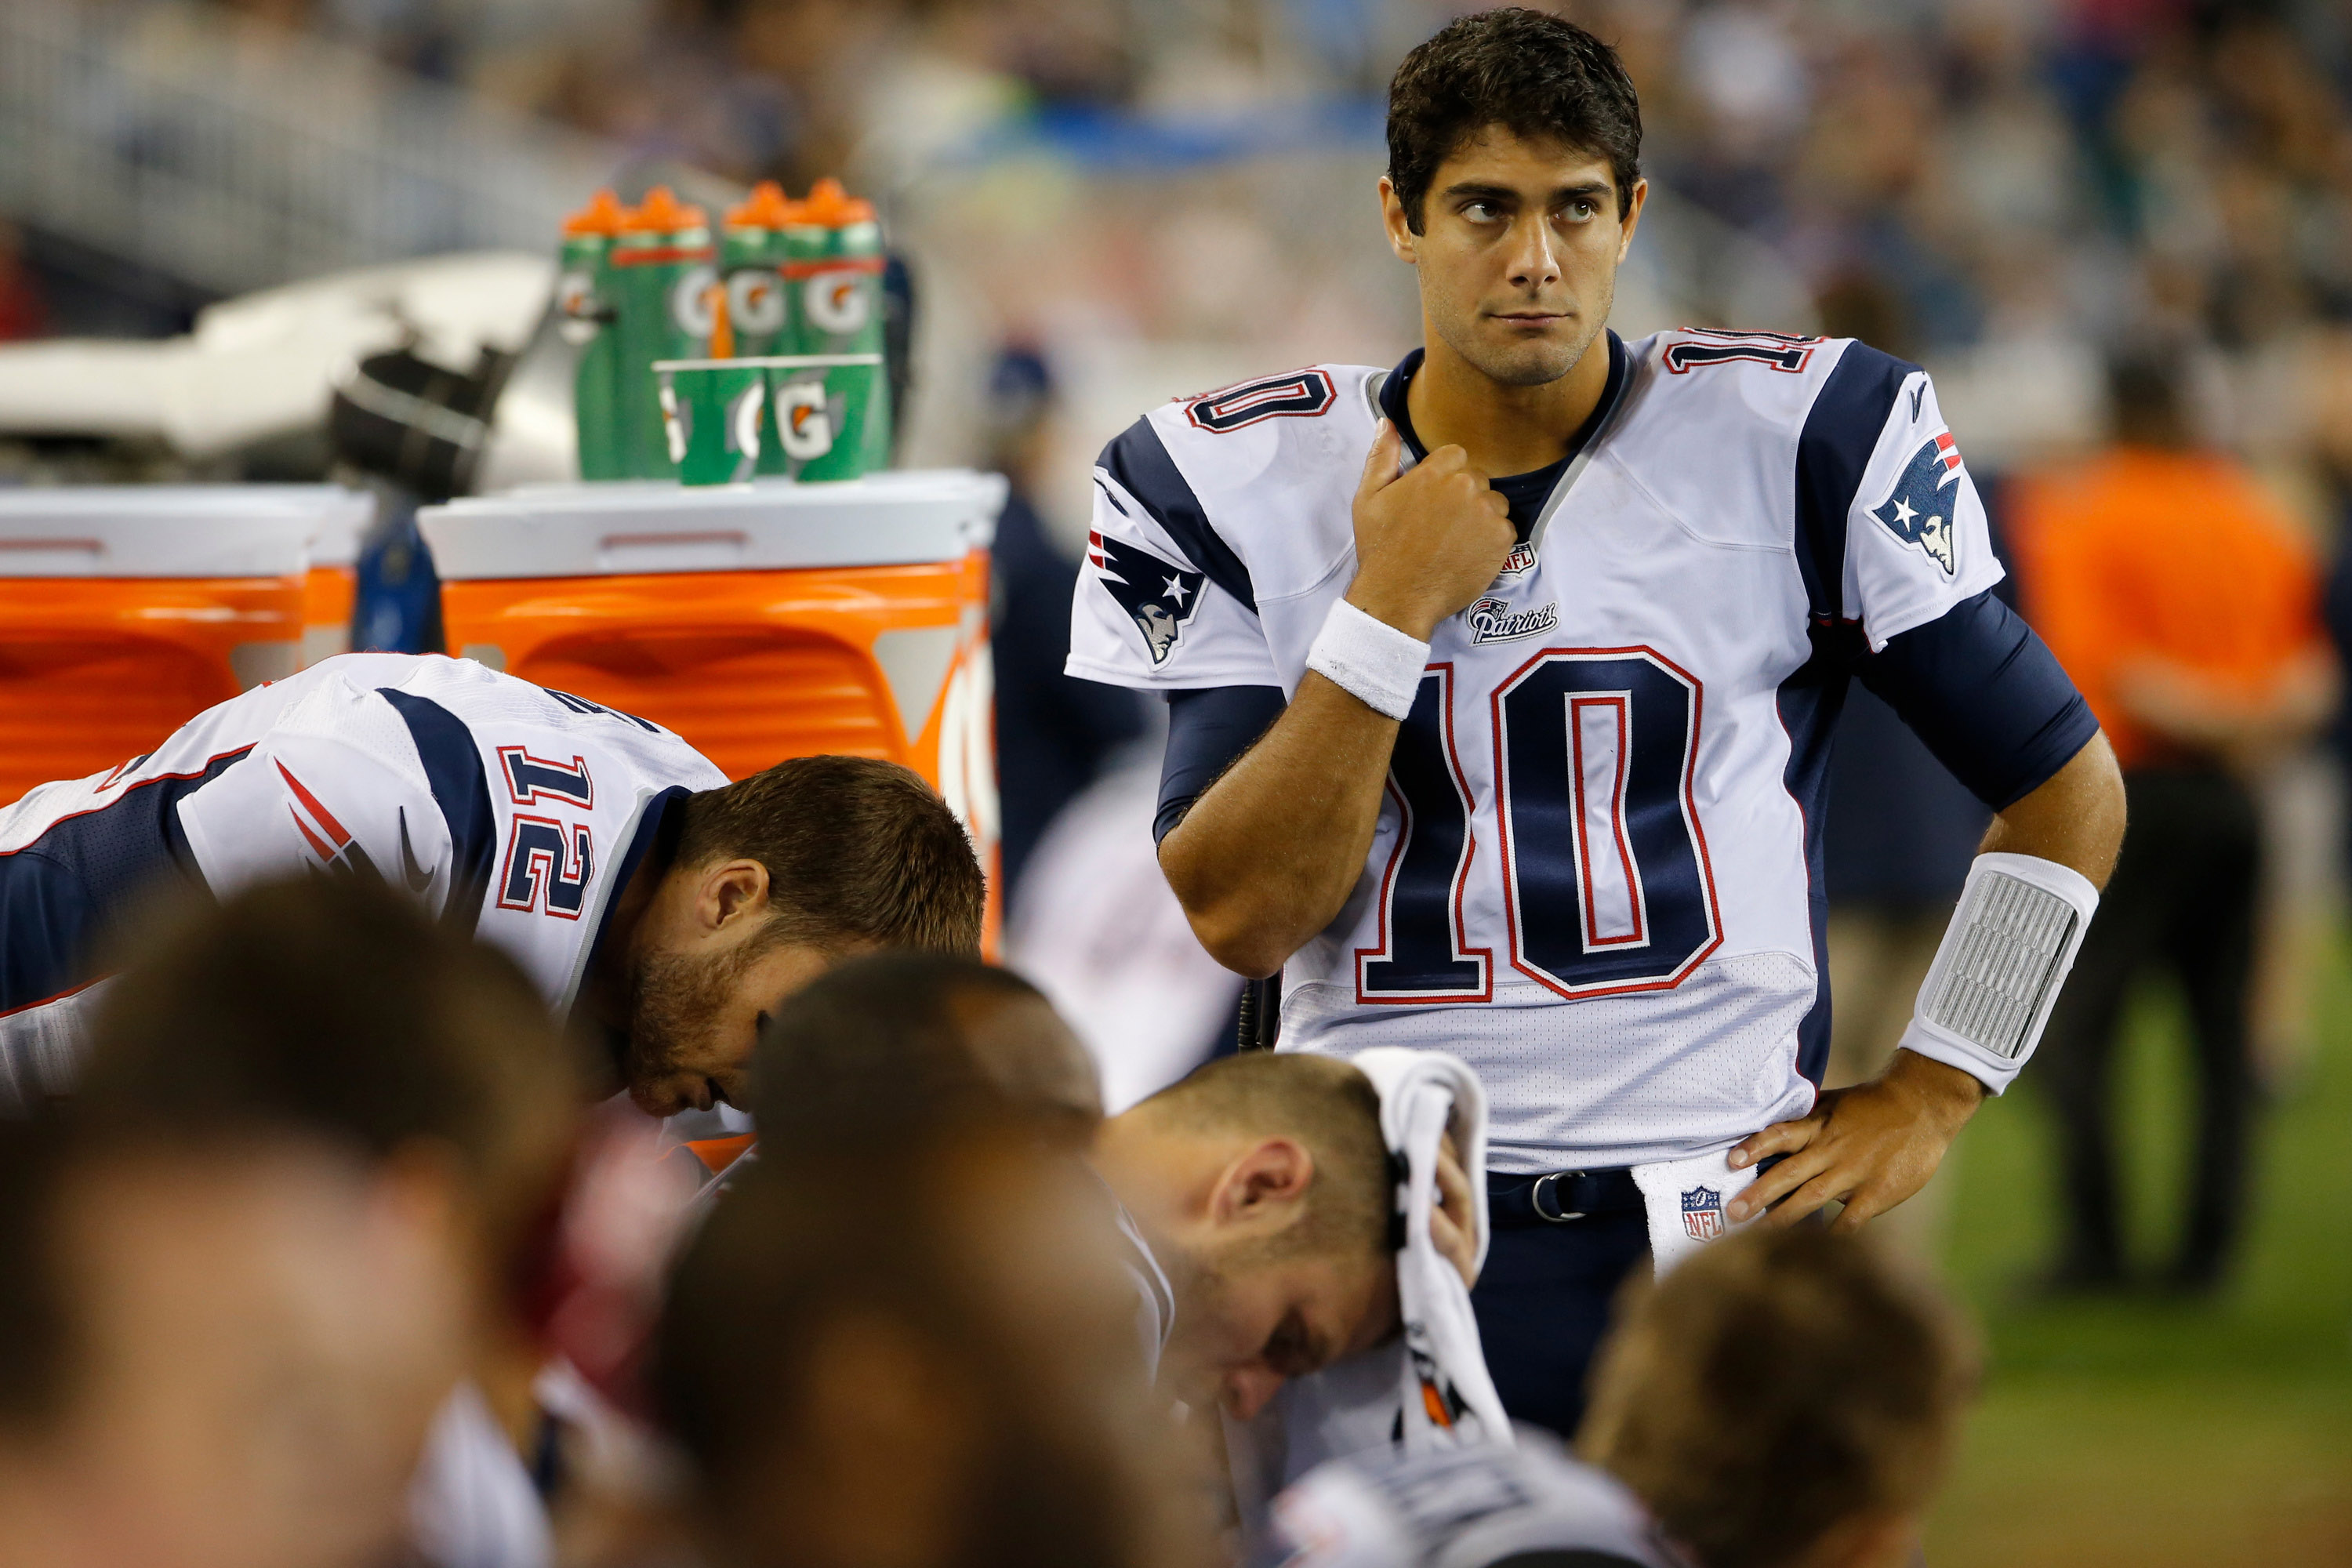 Aug 15, 2014; Foxborough, MA, USA; New England Patriots quarterback Jimmy Garoppolo (10) on the sideline as they take on the Philadelphia Eagles in the second half during the preseason game at Gillette Stadium. The New England Patriots defeated the Philadelphia Eagles 42-35. Mandatory Credit: David Butler II-USA TODAY Sports ORG XMIT: USATSI-180610 ORIG FILE ID: 20140815_mje_sv3_860.jpg